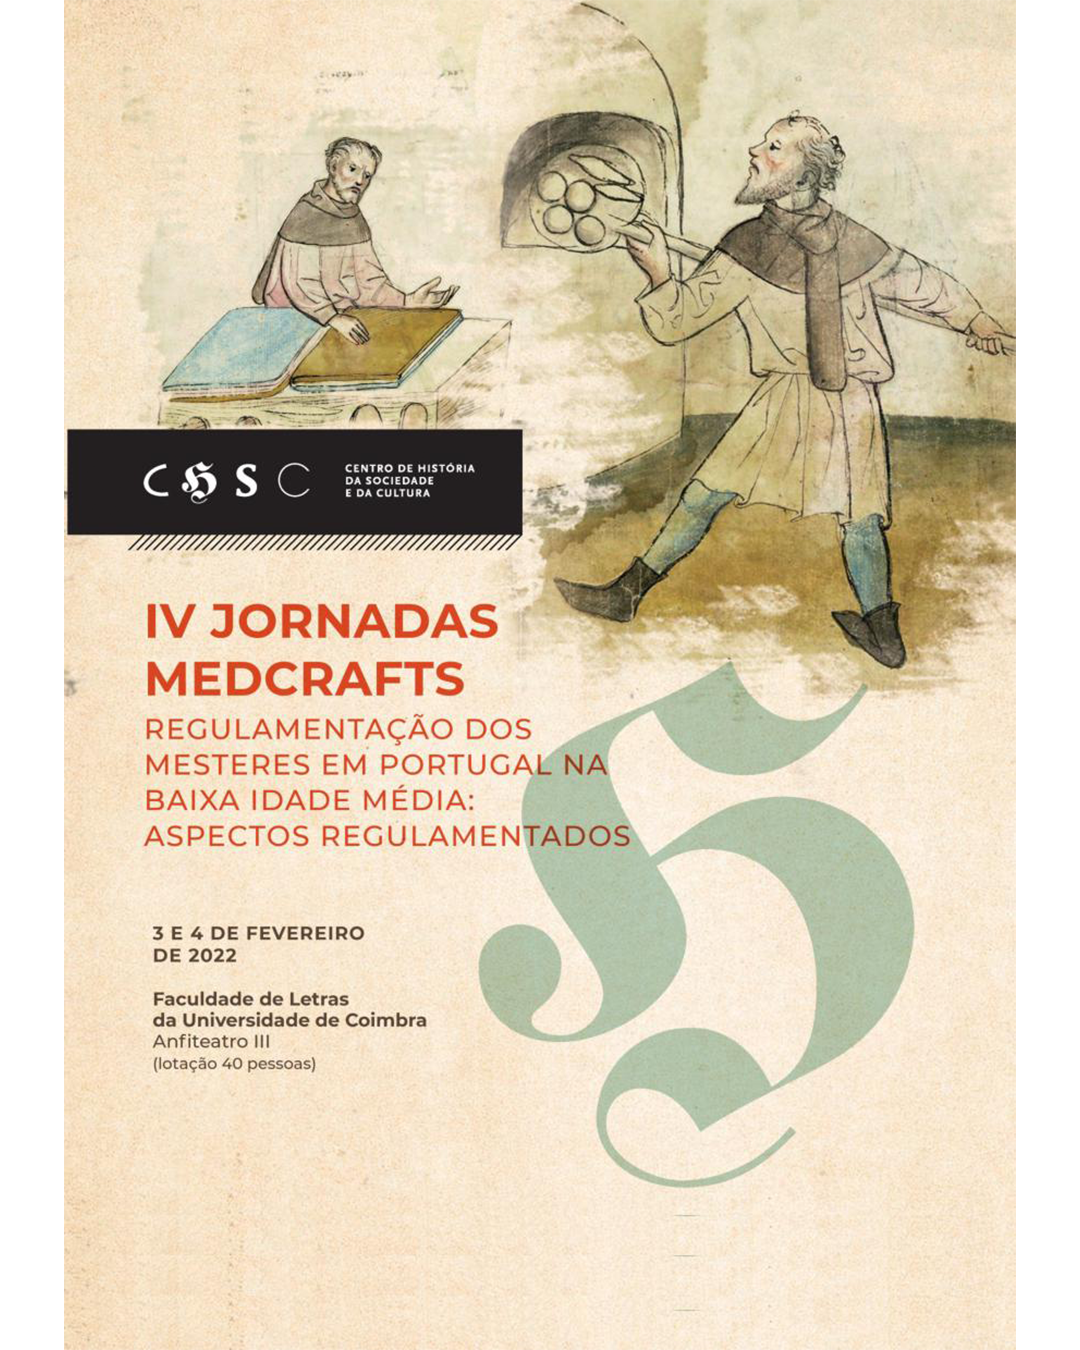 IV Medcrafts Journeys "Regulation of masters in Portugal in the Late Middle Ages: regulated aspects" image